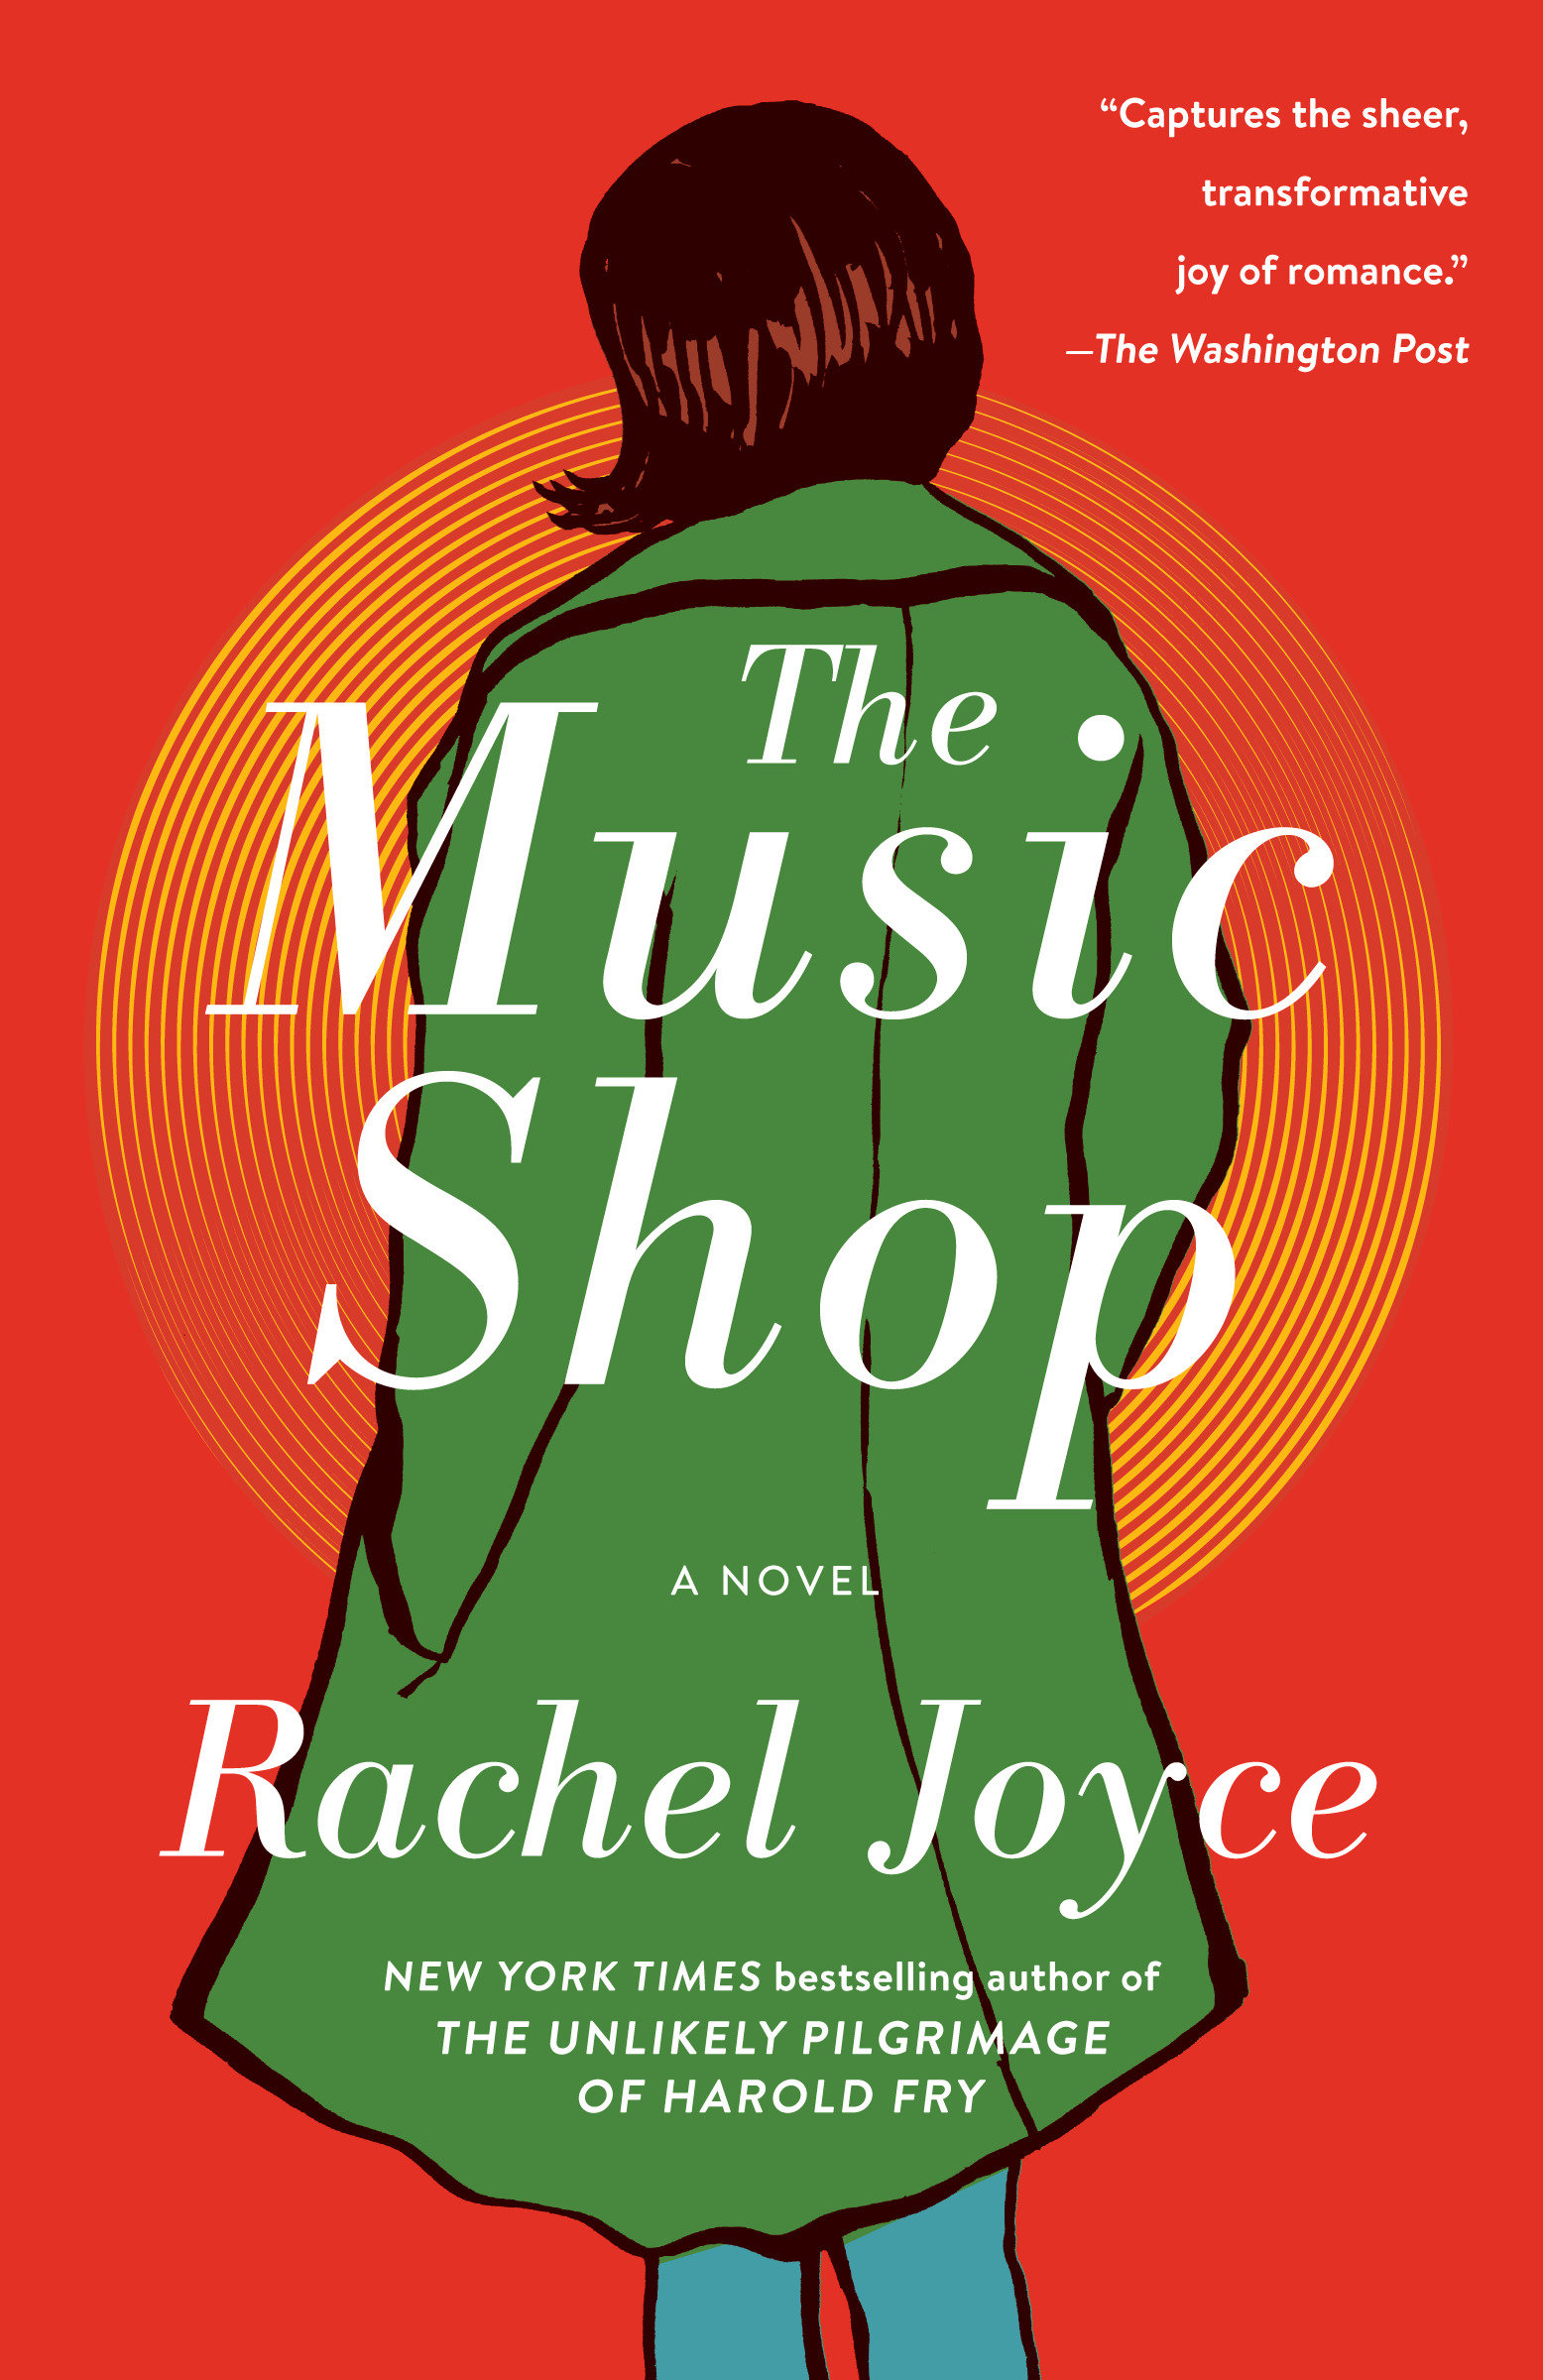 The music shop cover image